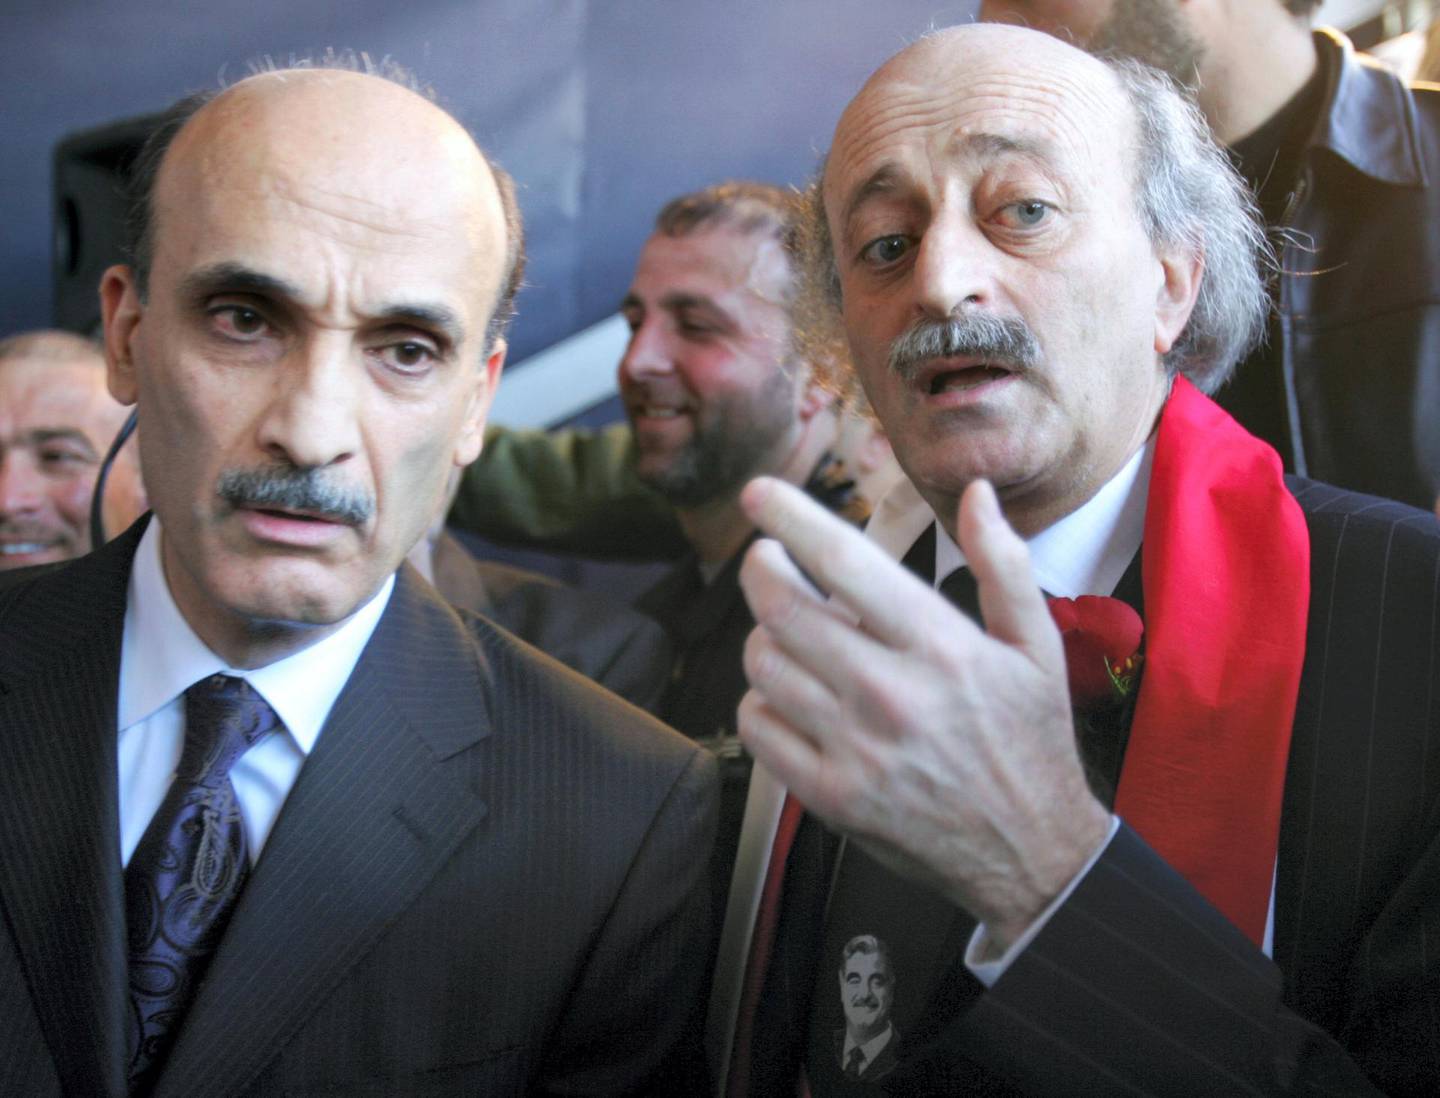 Lebaenese MP and Druze leader Walid Jumblatt (R) and Samir Geagea, the leader of the Christian Lebanese Forces ex-militia, attend a mass gathering to mark the first anniversary of premier Rafiq Hariri's assassination in central Beirut 14 February 2006. Speaking at the mass rally, Jumblatt went a step further to brand Syrian President Bashar al-Assad a "terrorist tyrant". The Lebanese capital was transformed into a sea of red and white flags as Lebanon marked the first anniversary, still struggling to unite in the shadow of its former powerbroker Syria.  AFP PHOTO/RAMZI HAIDAR (Photo by RAMZI HAIDAR / AFP)